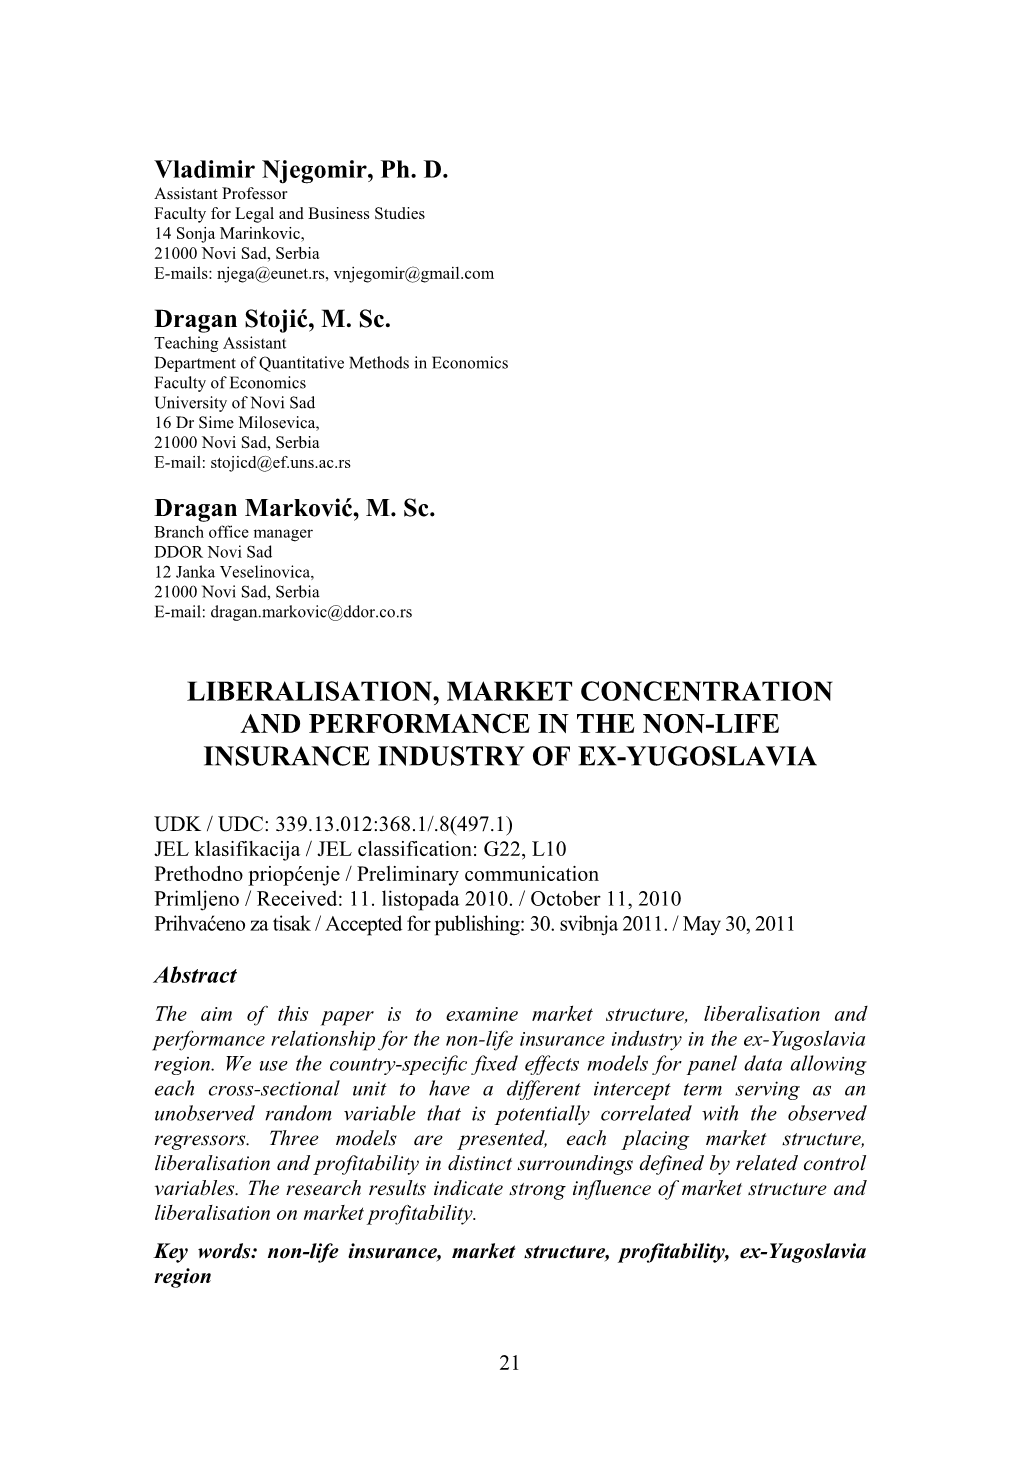 Liberalisation, Market Concentration and Performance in the Non-Life Insurance Industry of Ex-Yugoslavia